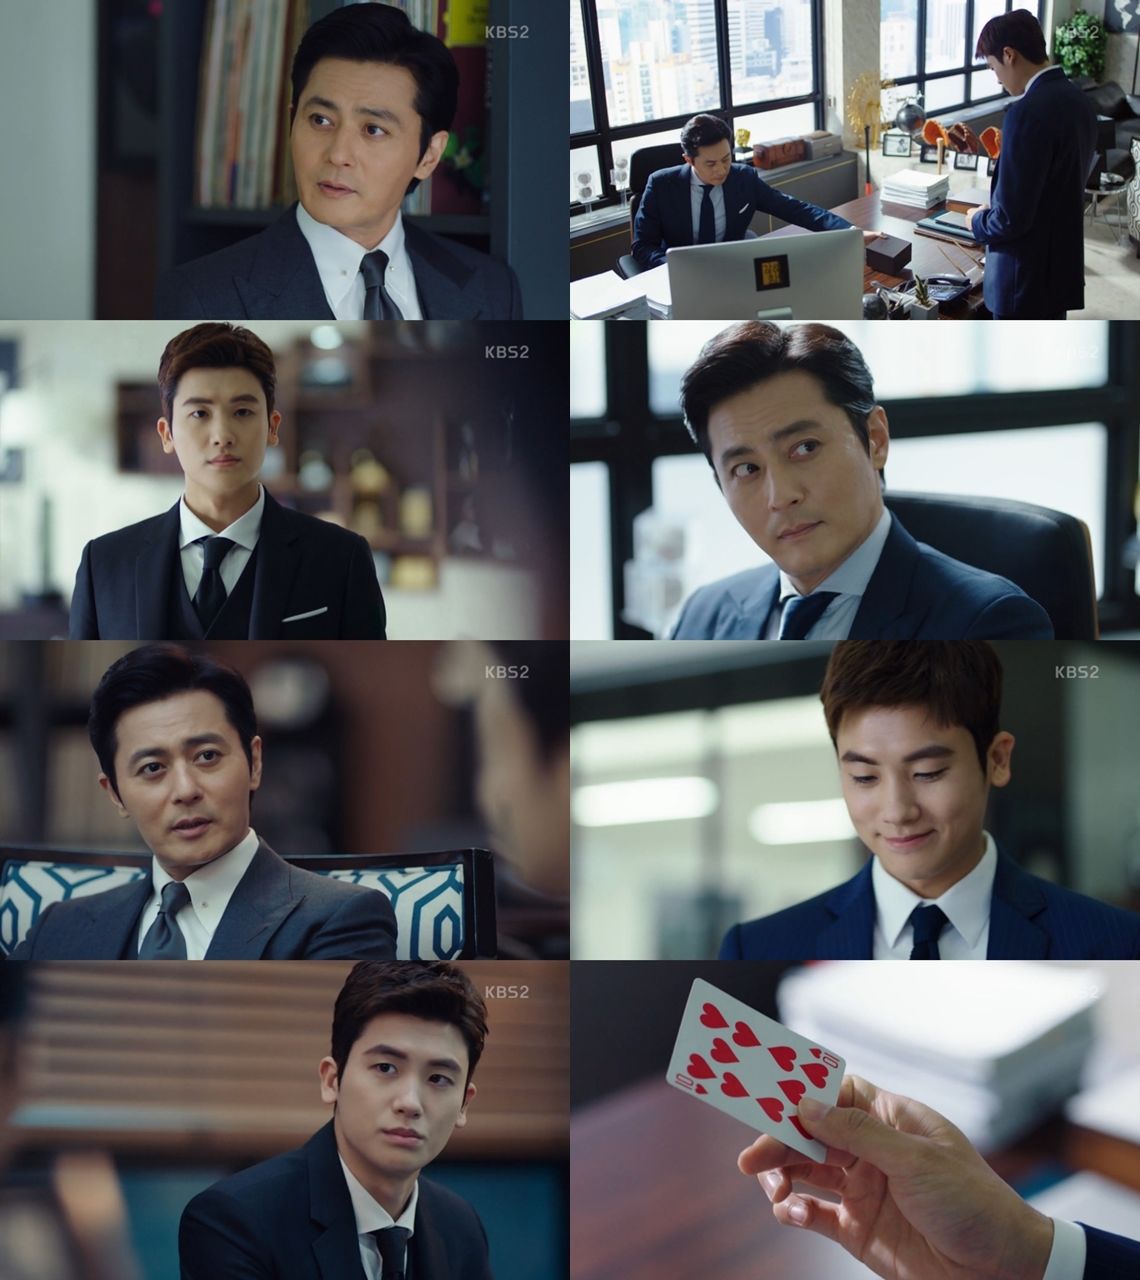 KBS 2TV drama Suits is a bromance drama, two men who look completely different from each other, and its nice to be alone, but two men who are so attractive that they can go back to the snow.Their special combi play and bromance were Suits.The 11th episode of Suits broadcast on the last 30 days was a turn to see why Choi Kang-seok and Ko Yeon-woos romance are special and why they are attractive.This is because the romance has evolved as the relationship of the characters changes, not the one-sided and fragmentary romance represented by the word friendship.In this process, viewers could feel the excitement as much as any romance.Park Hyeong-sik (Ko Yeon-woo) was a full-time lawyer and took on a solo case.Jang Dong-gun (Choi Kang-seok) watched Park Hyeong-sik with a heart of cheer, of course Jang Dong-gun did not reveal this.They were just as tit-for-tat as ever, but their relationship and their hearts toward each other were different.Jang Dong-gun bought a watch for Park Hyeong-sik, who was in charge of his first solo case.Because I had seen Park Hyeong-sik wearing an unmoving clock, of course the single case had several ups and downs to Park Hyeong-sik.Park Hyeong-sik faced the incident with his own gaze, and did not leave the fee, but solved the case in a way that the weak could be happy.Jang Dong-gun is a man who only plays winning games. Is it human to find one thing that he lacks?Jang Dong-gun, who had no blood or tears for victory, is accepting Park Hyeong-sik, which could be a fatal weakness for him, and is cheering for his growth.Only the gift was given. Chang Dong-guns change by Ko Yeon-woo. Its the evolution of the romance.Park Hyeong-sik had genius memory and empathy but could not be a lawyer because he was not given a chance.Such a Park Hyeong-sik could meet Jang Dong-gun and take a step closer to his dream of becoming a lawyer.Park Hyeong-sik rewards with step-by-step growth, and is taking the opportunity nicely.Park Hyeong-sik was trying to get cold as if he was Jang Dong-gun in front of his first single case, showing him what Jang Dong-gun is.Jing Dong-gun and Park Hyeong-siks evolutionary bromance raise questions and expectations